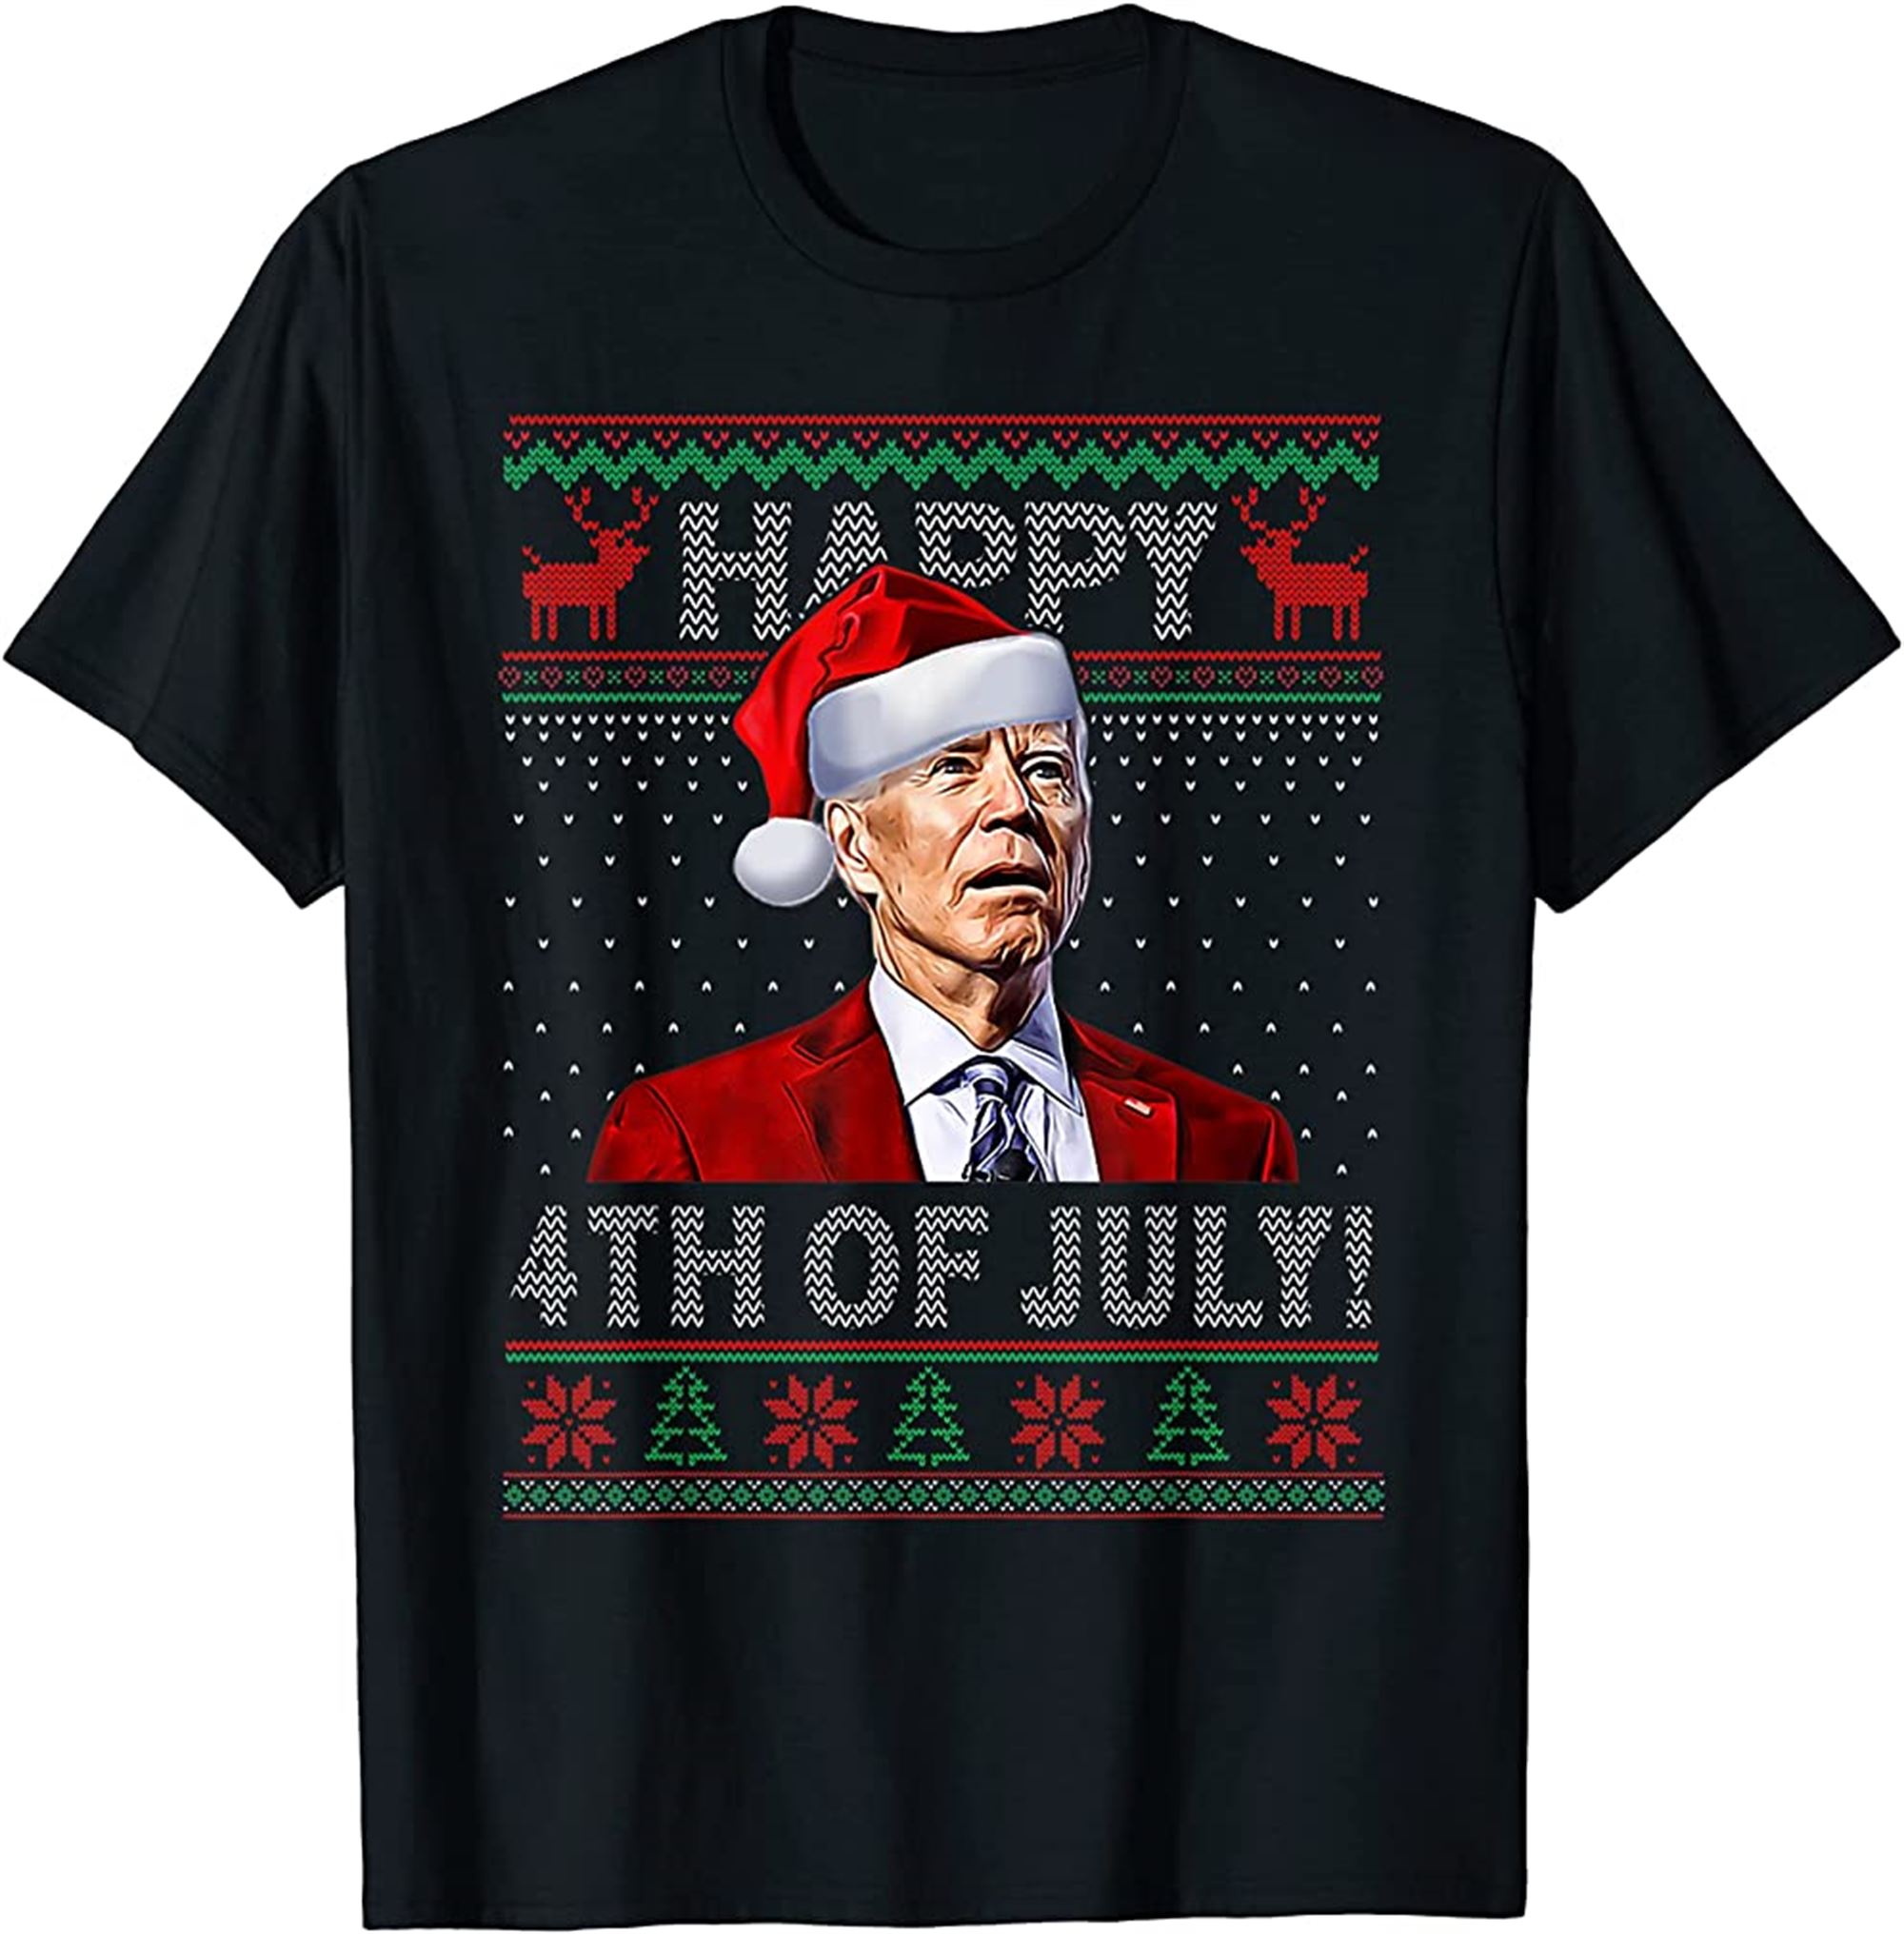 Funny Joe Biden Happy 4th Of July Ugly Christmas Sweater T-shirt Full Size Up To 5xl